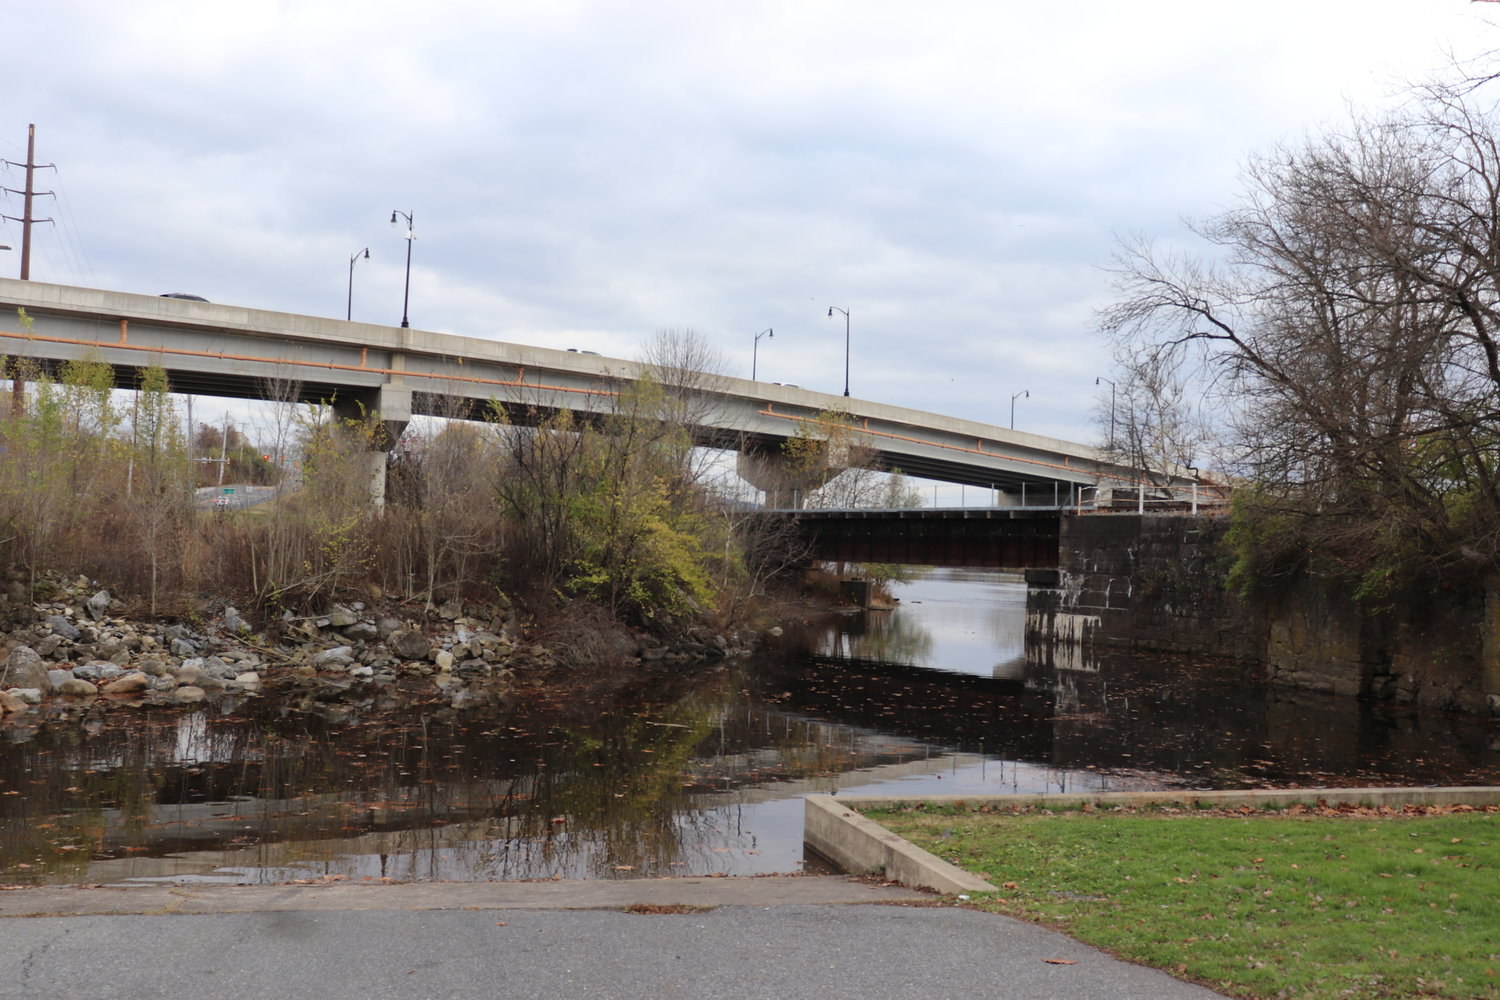 The DLNHC funding location view at Kimmett’s Lock Trailhead,
where the trail will travel underneath the bridge in the background, bypassing the trestle in the image.